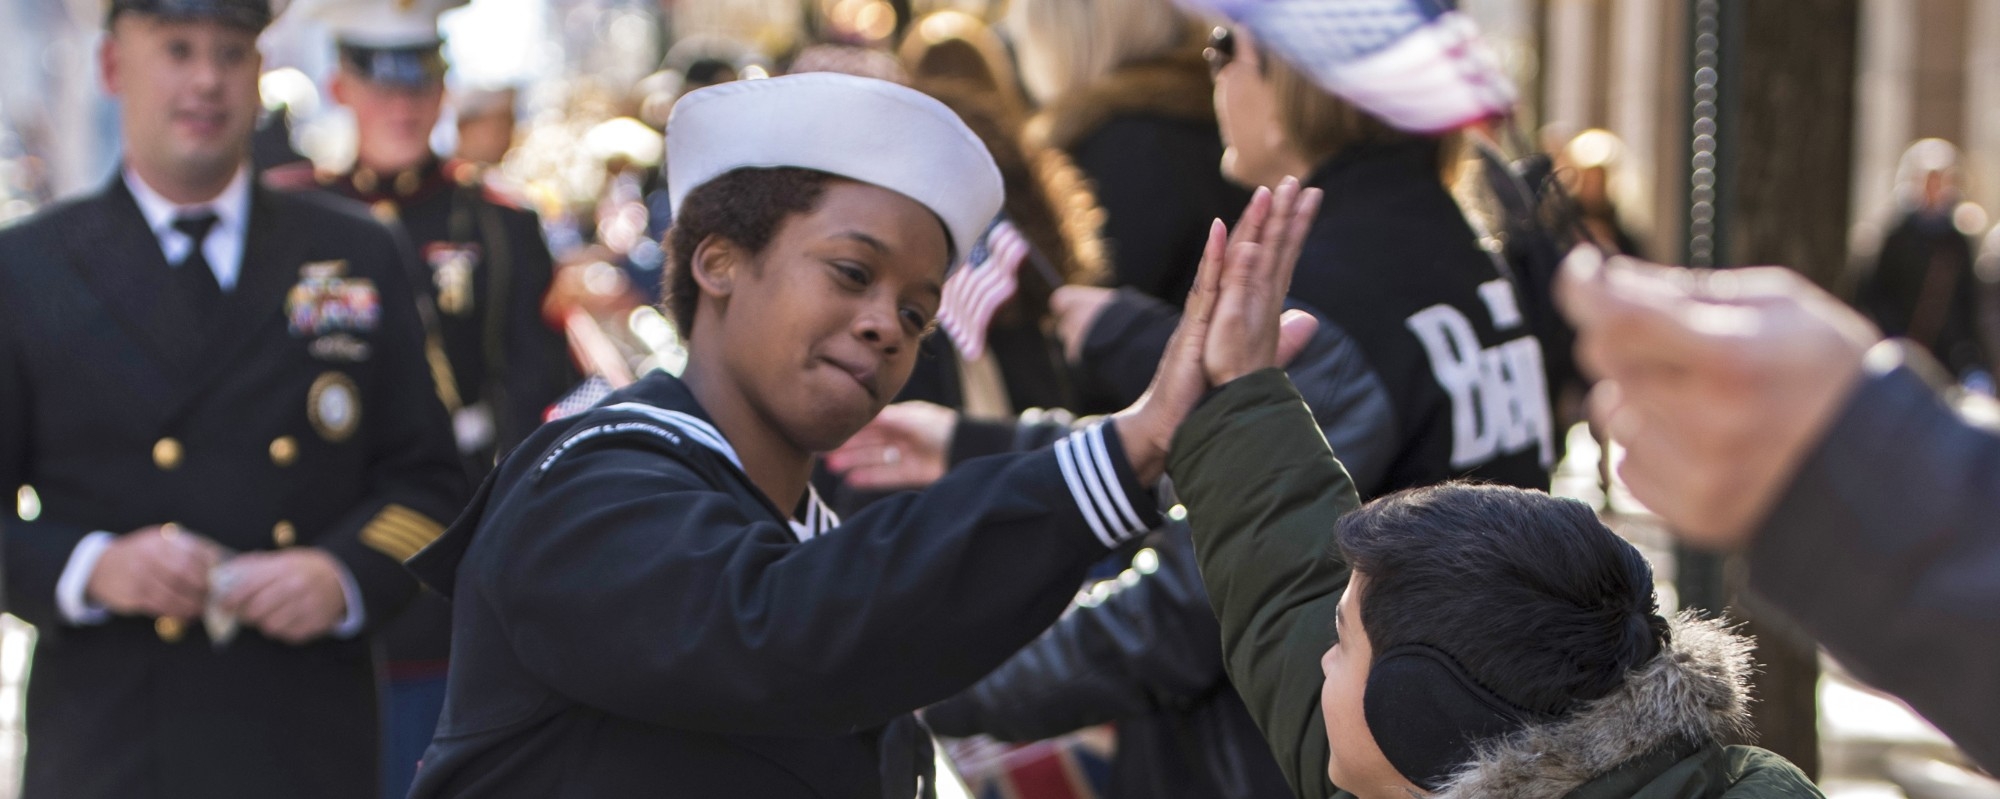 Navy Petty Officer 3rd Class Zatyra Rousseau high-fives a child during the 2018 Veterans Day Parade in New York City, Nov. 11, 2018.